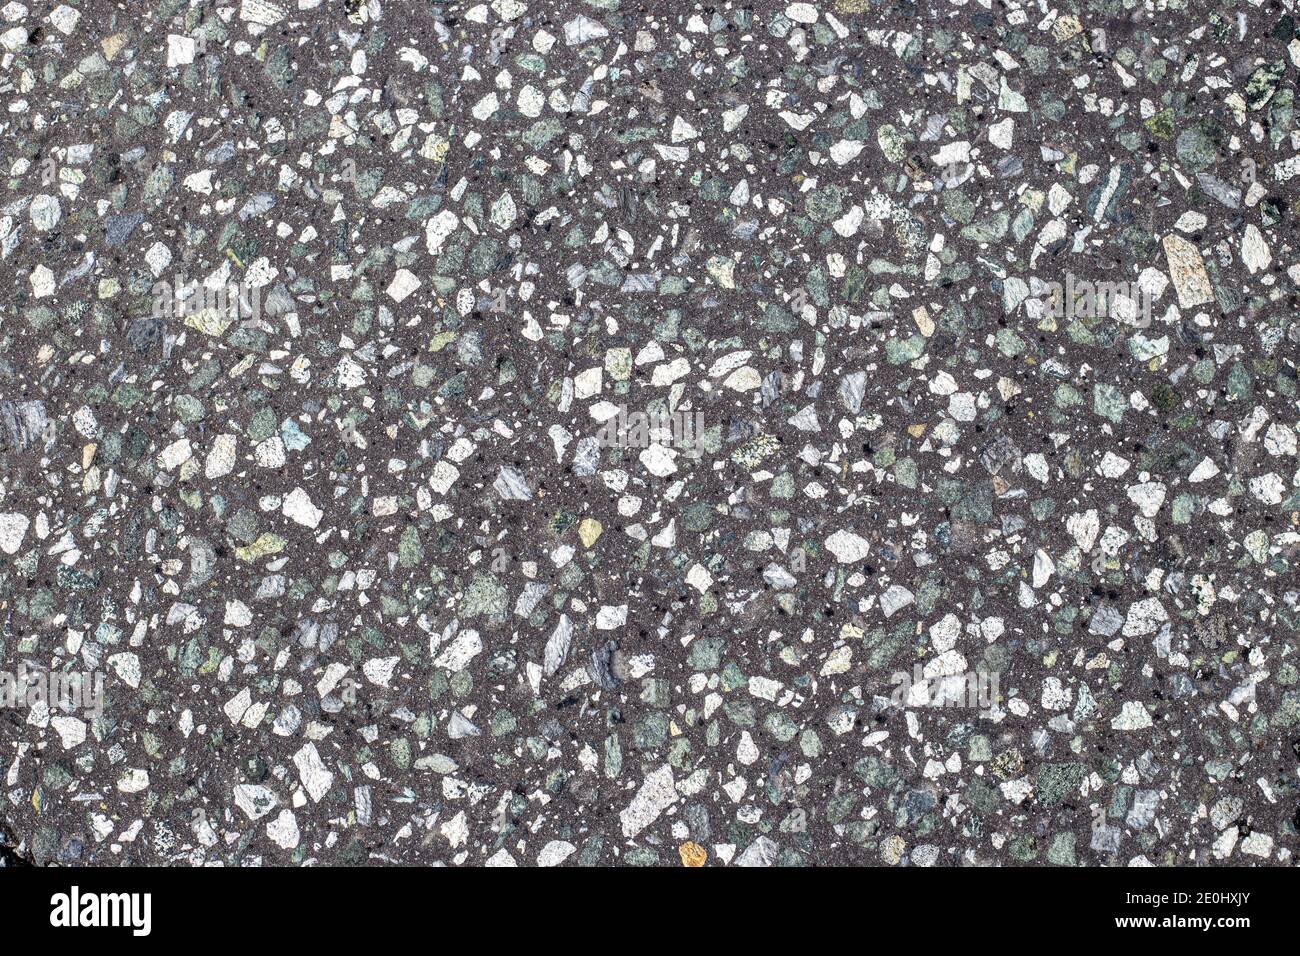 gray asphalt interspersed with fine gravel. Road surface texture. Background for text Stock Photo